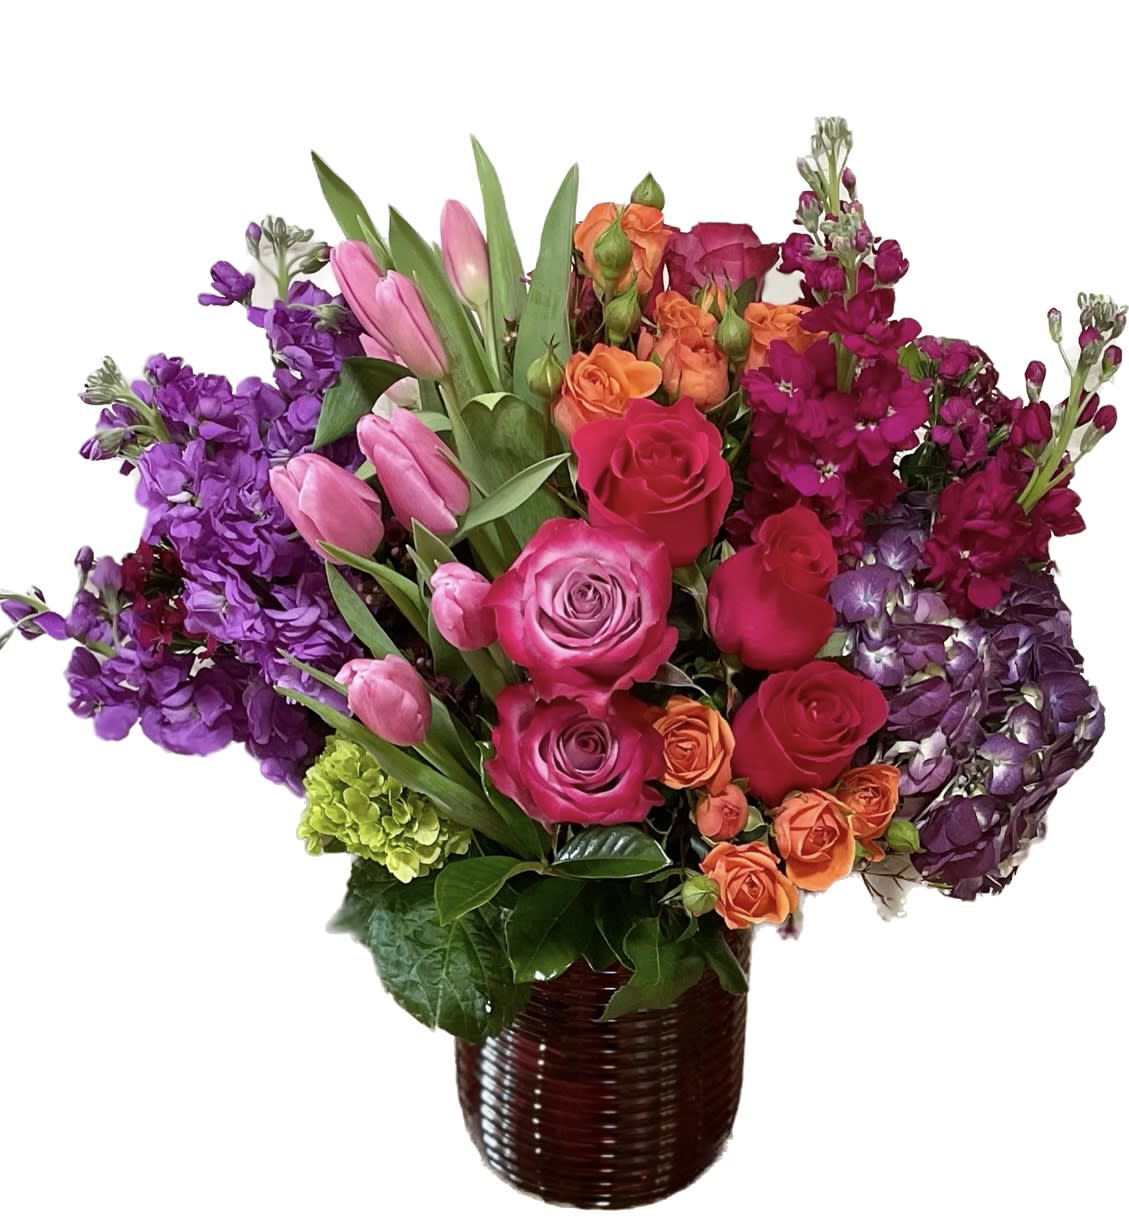 Crown Jewel - A beautiful arrangement of bright, eye catching jewel tones.  Arranged in a tasteful red, ribbed, glass vase.  Send some gorgeous color to that special someone this Valentines Day!